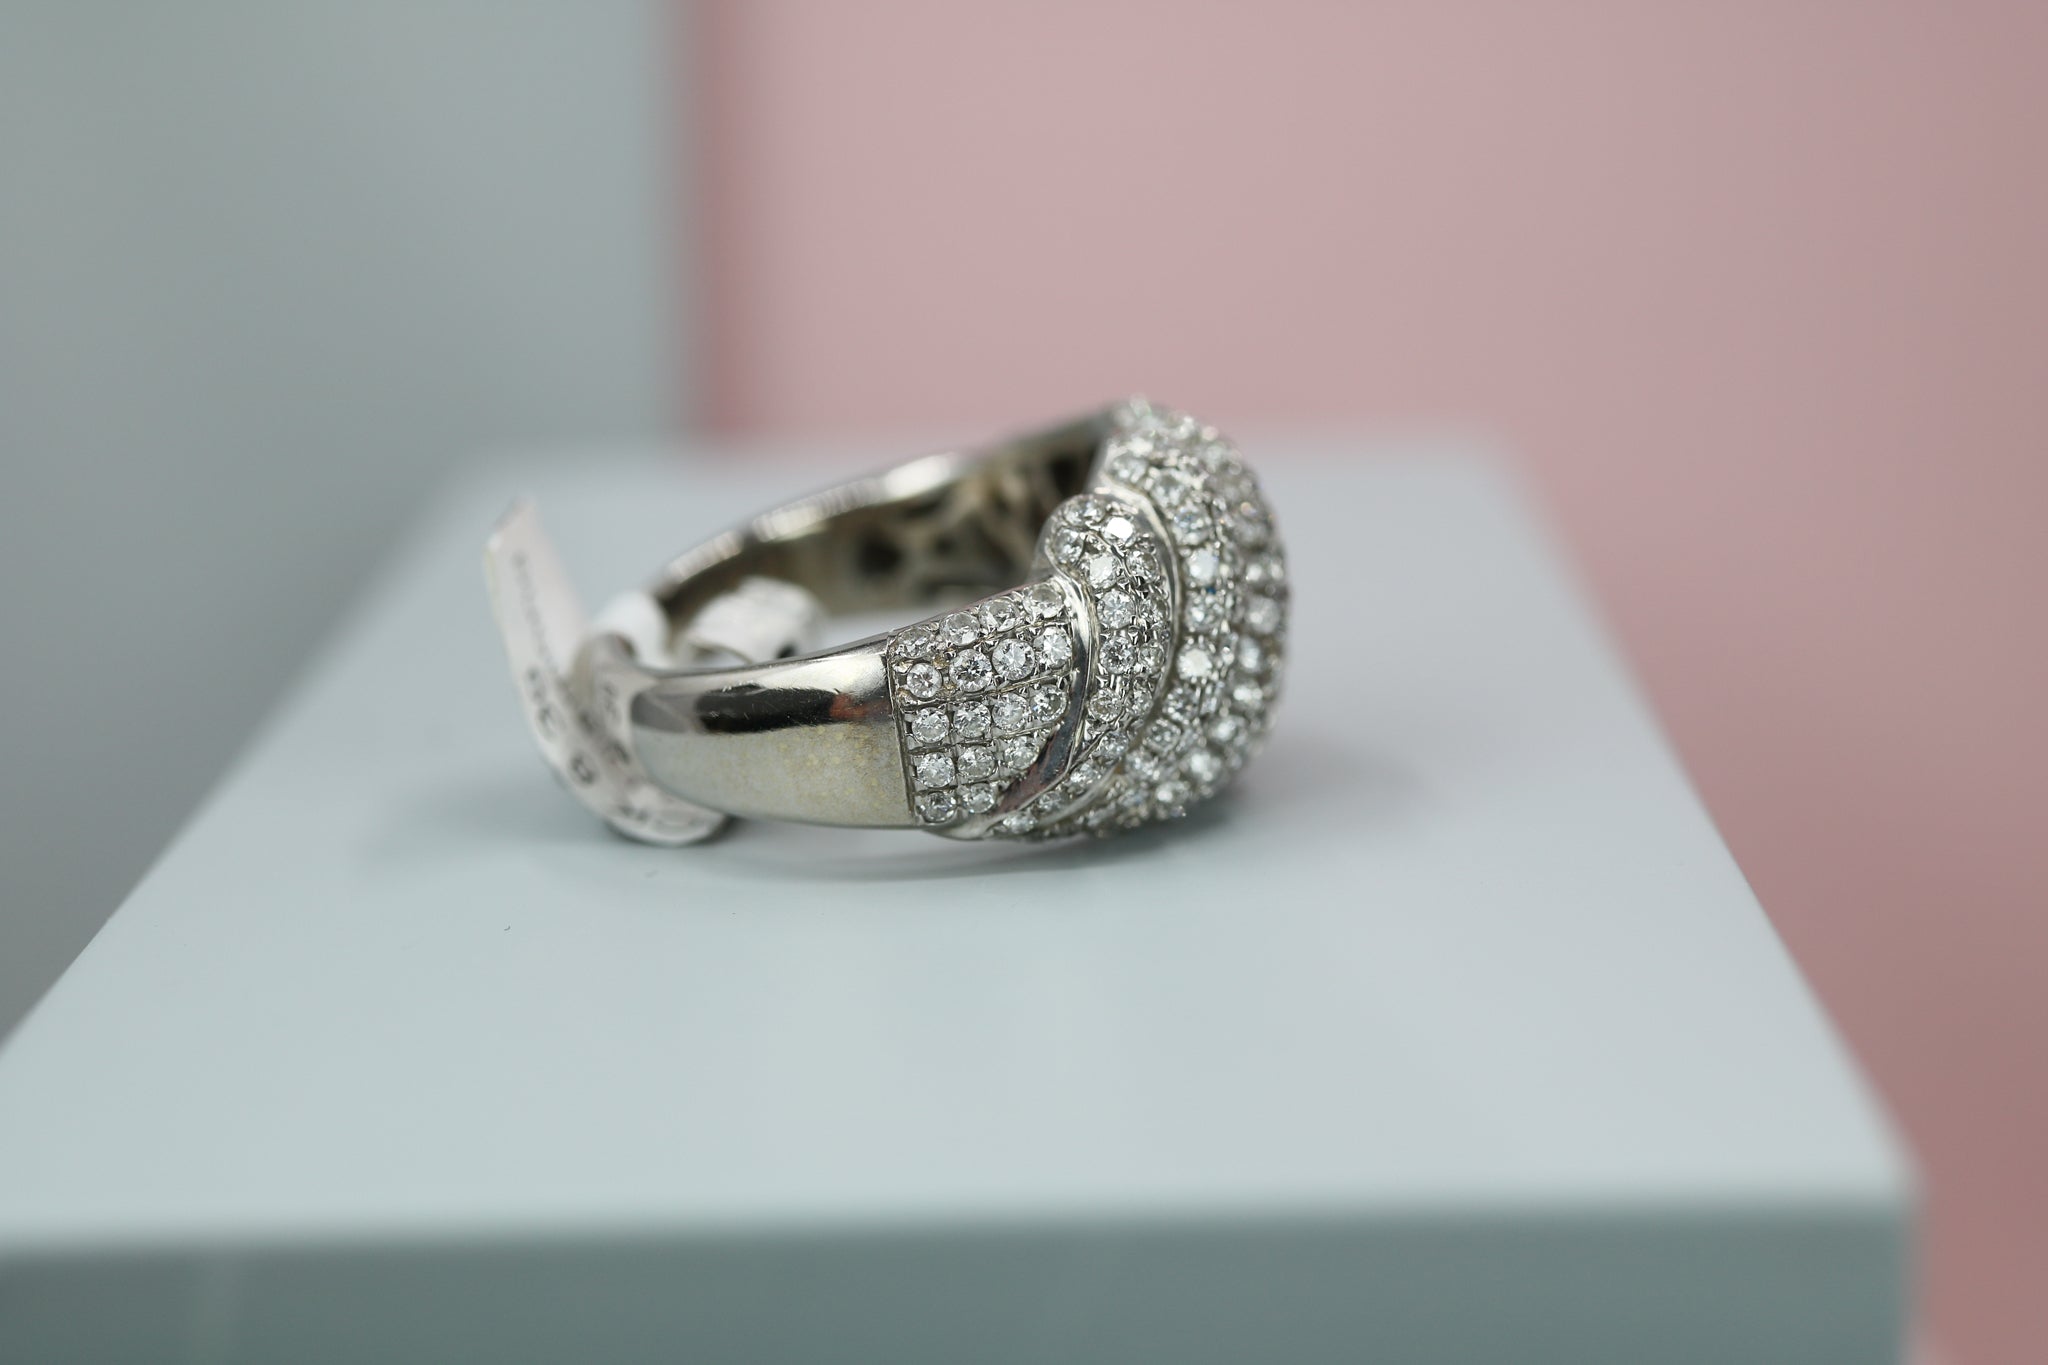 18ct White Gold Croissant Diamond Ring - HJ2112 - Hallmark Jewellers Formby & The Jewellers Bench Widnes